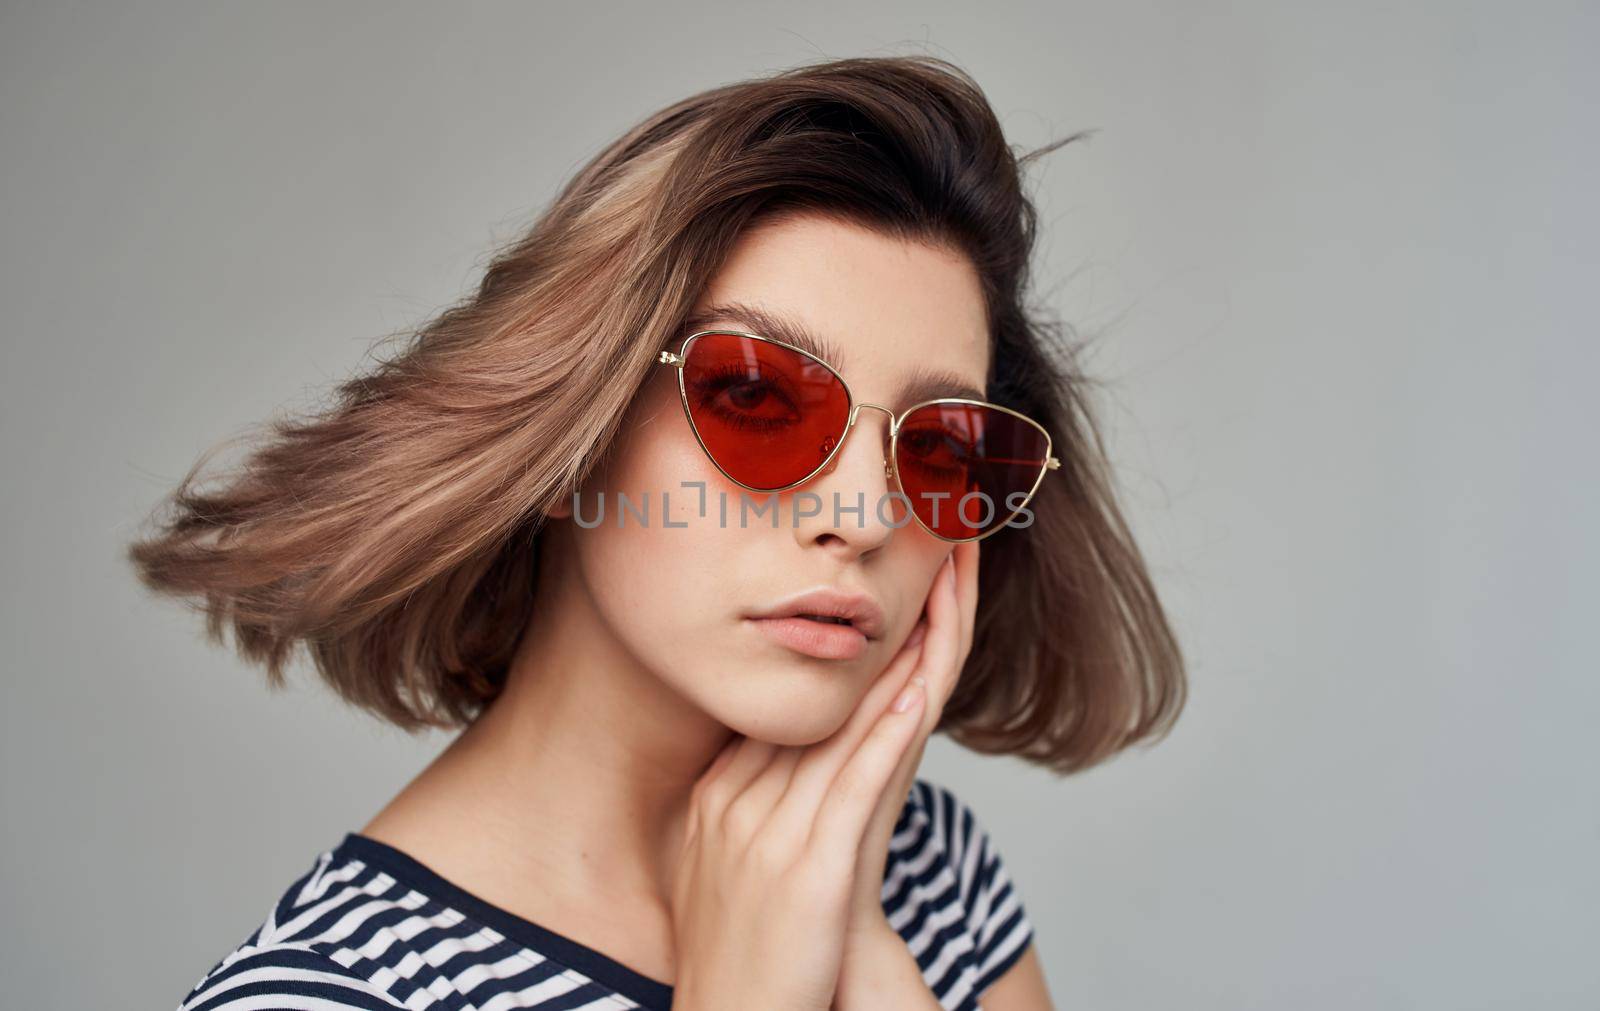 romantic woman in striped t-shirt portrait on gray background and fashionable glasses on face by SHOTPRIME